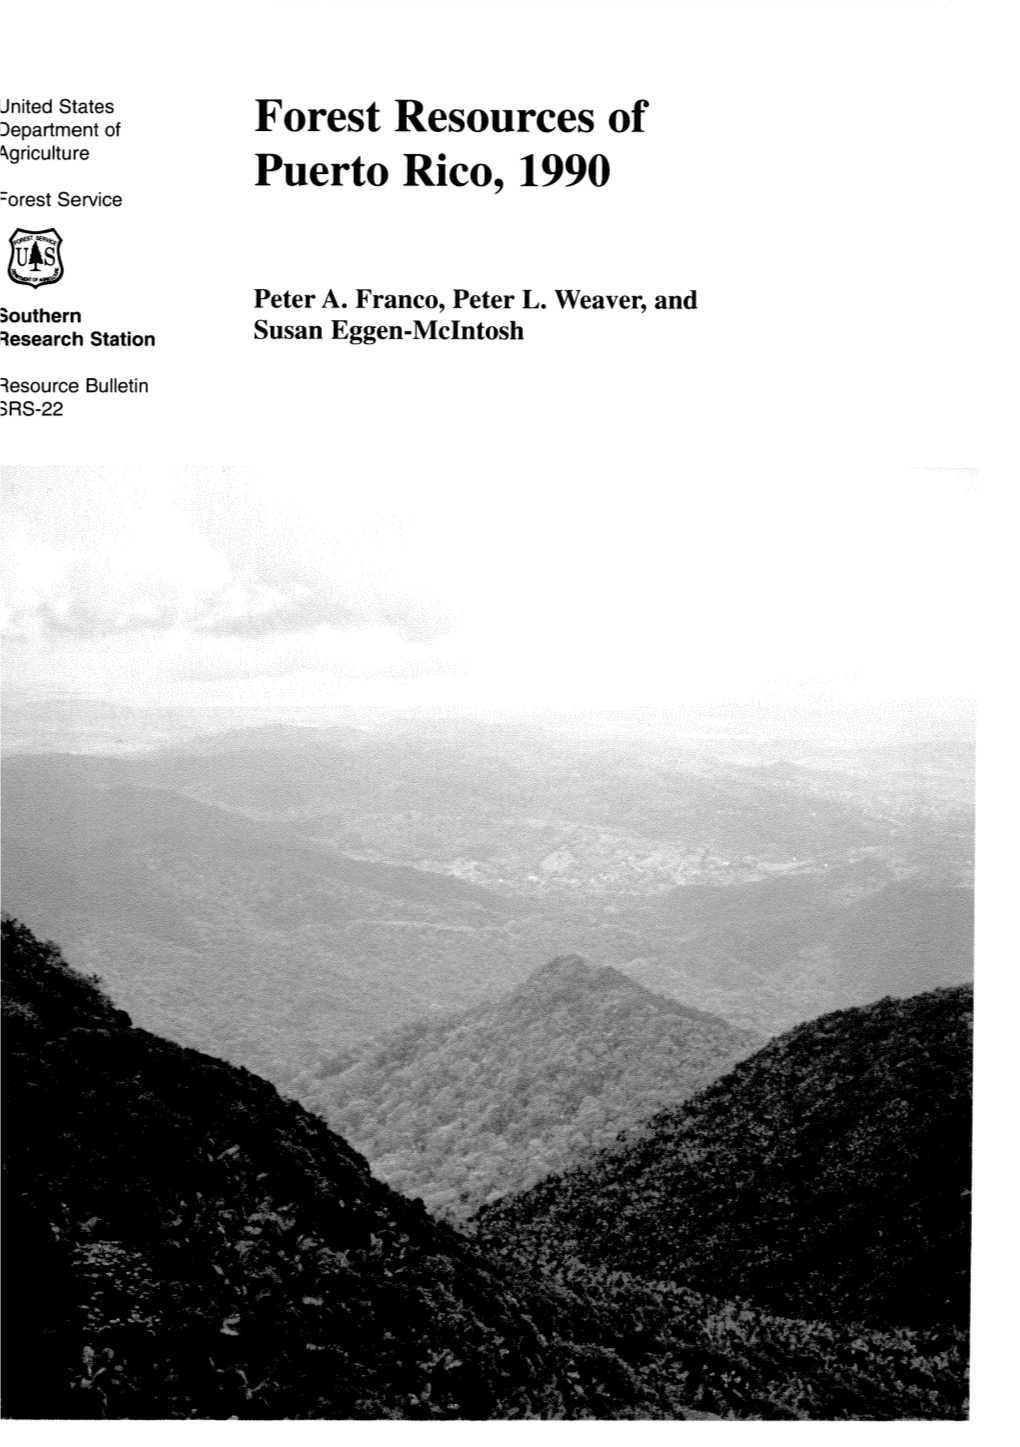 Forest Resources of Puerto Rico, 1990 by Peter A